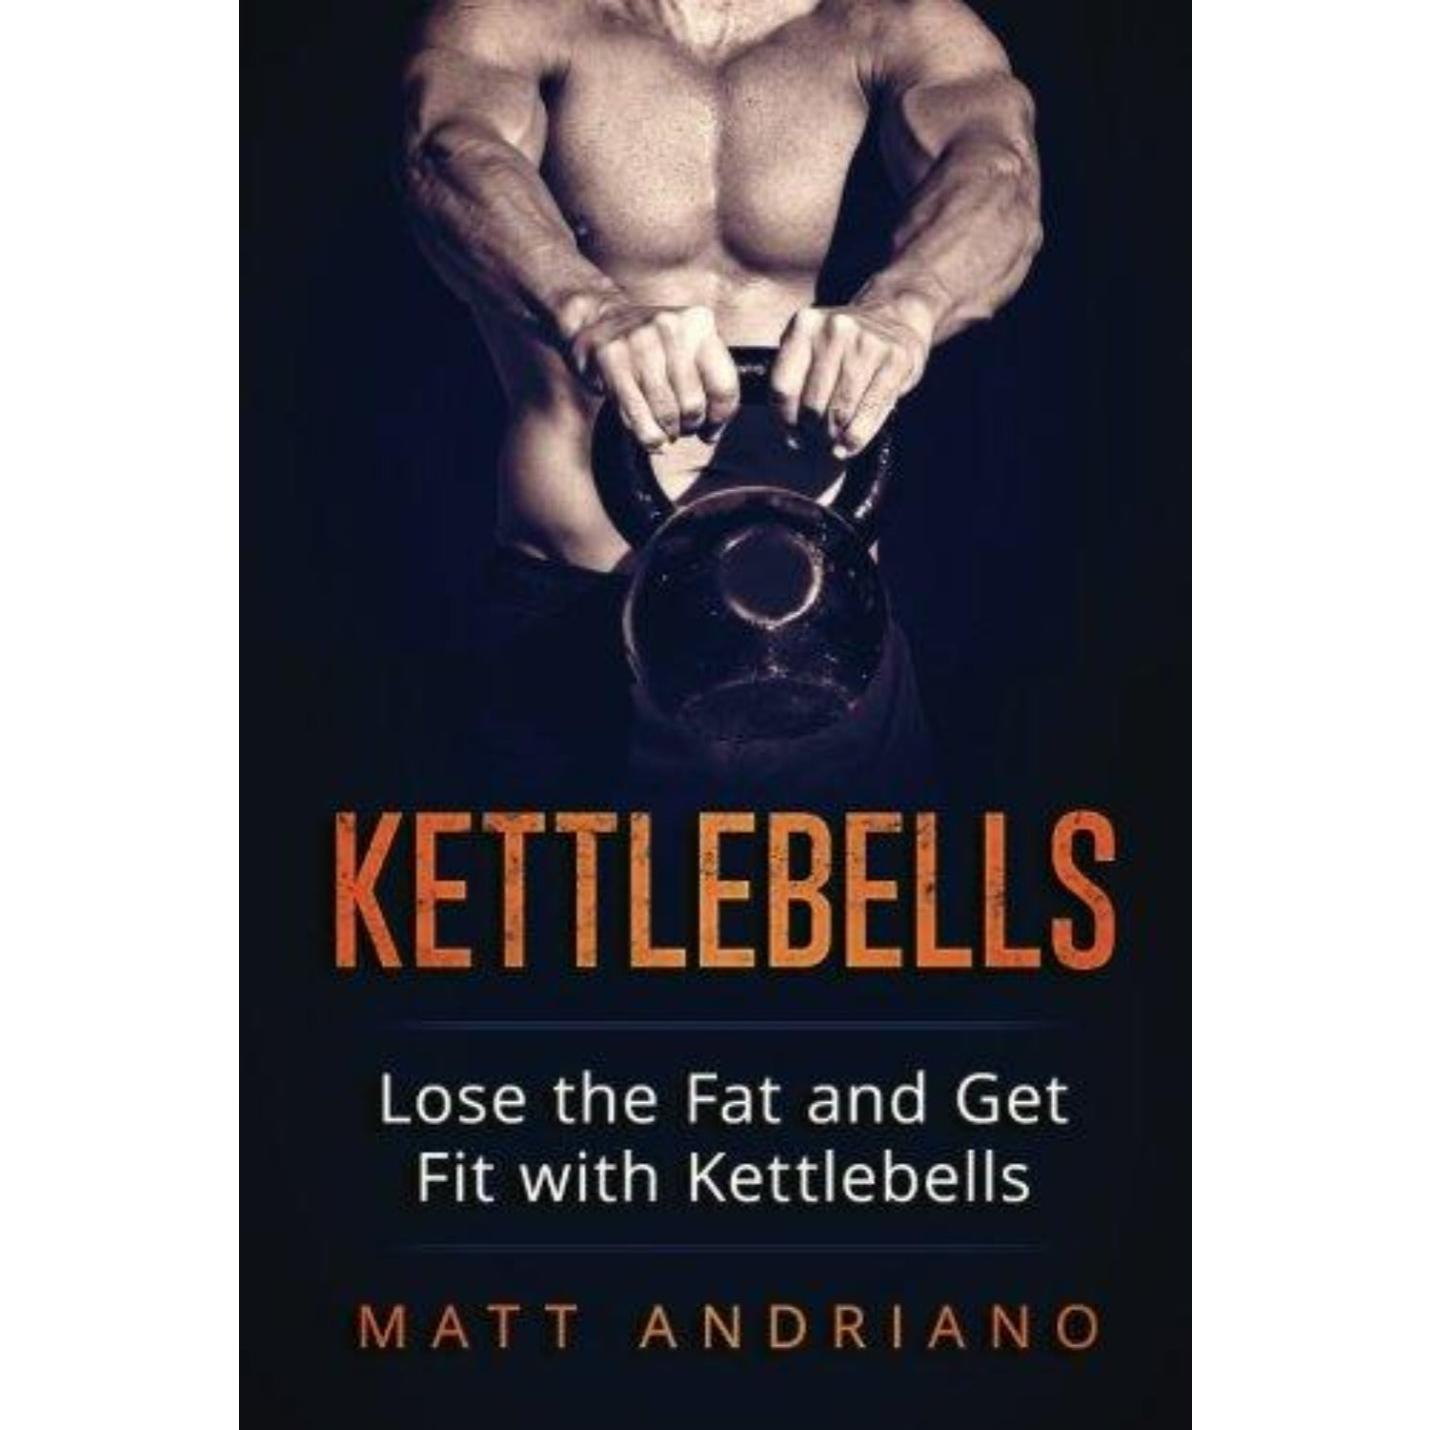 Kettlebells: Lose the Fat and Get Fit with Kettlebells - happygetfit.com